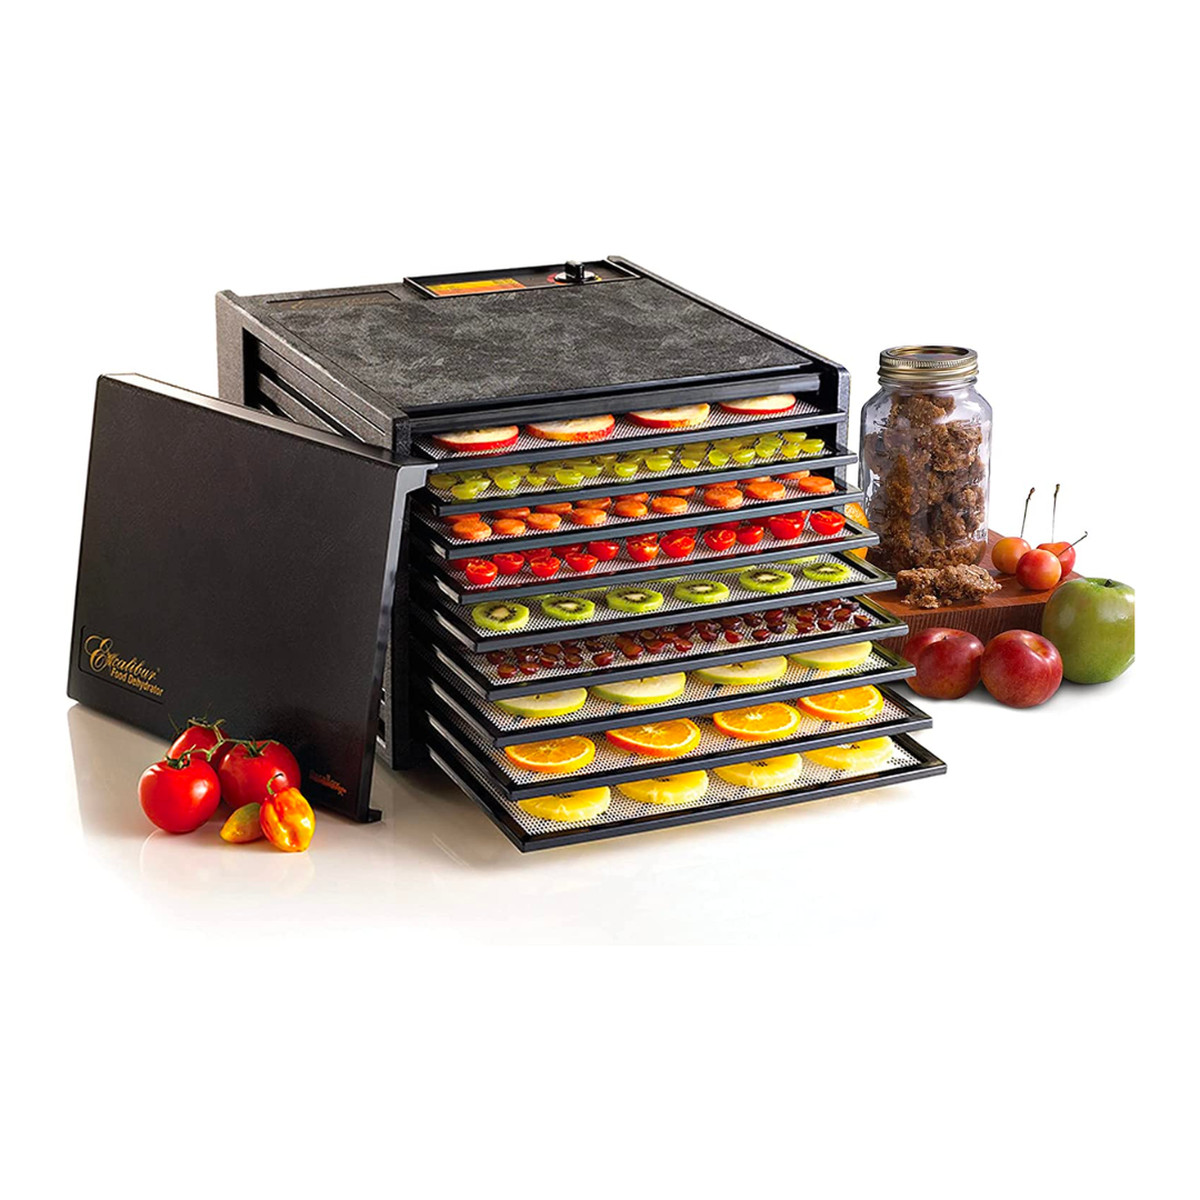 Excalibur food dehydrator with nine separate trays and sample food items